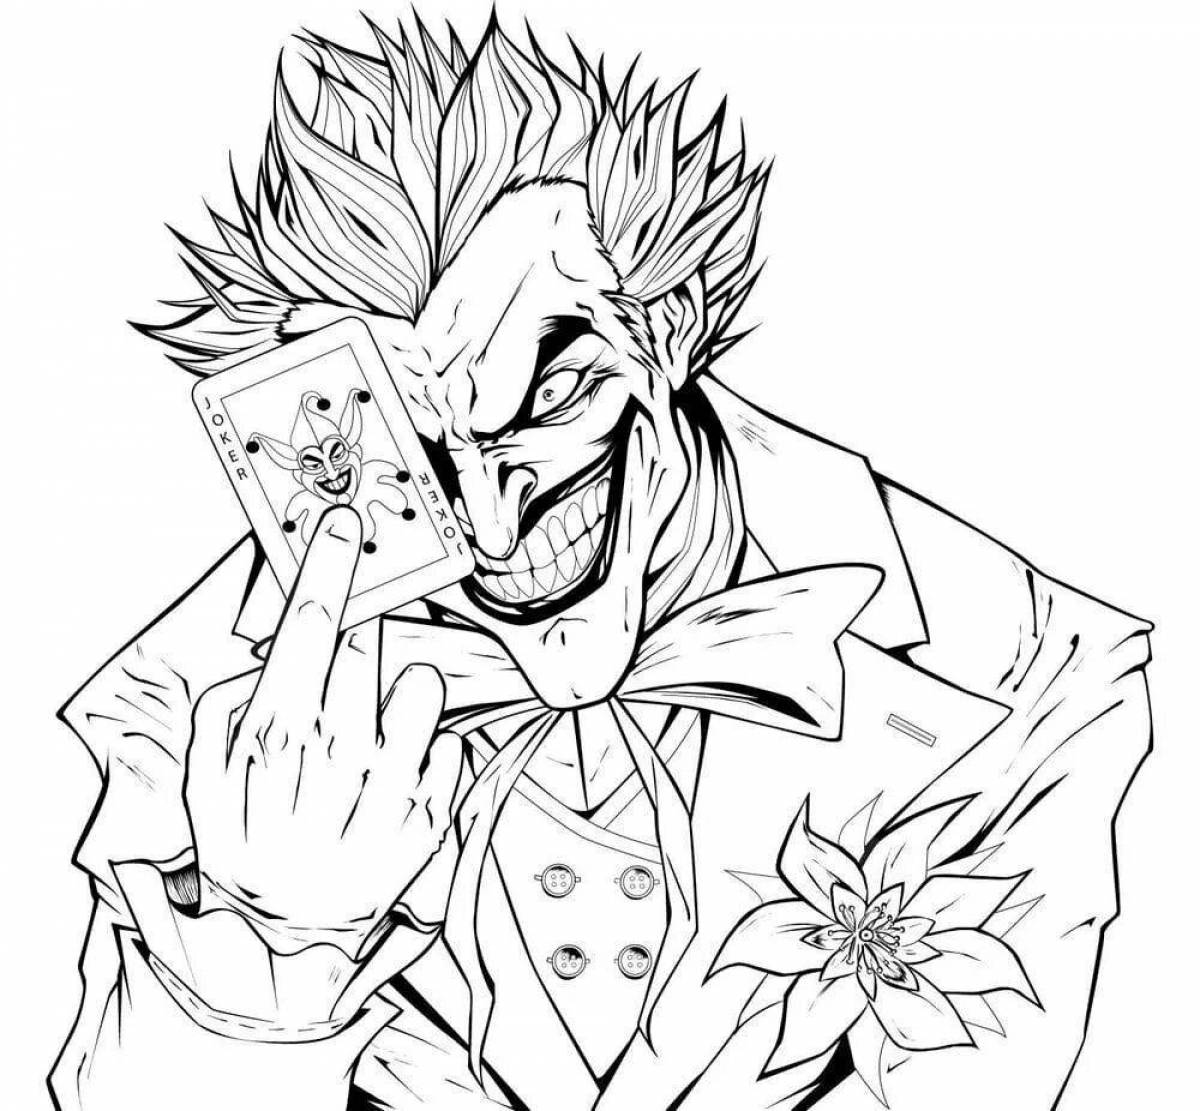 Fat joker coloring page